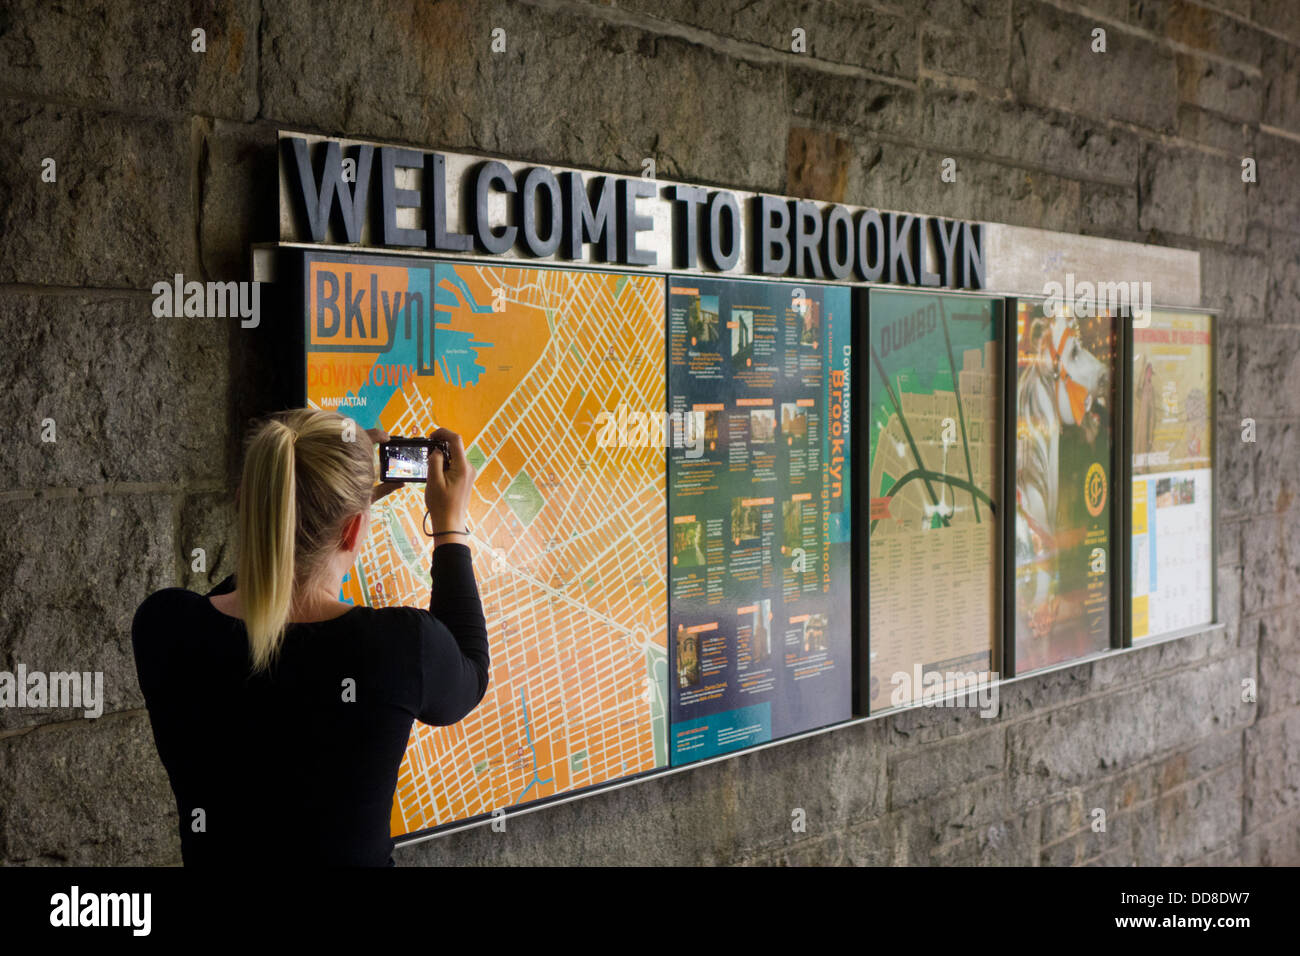 welcome to Brooklyn sign Stock Photo